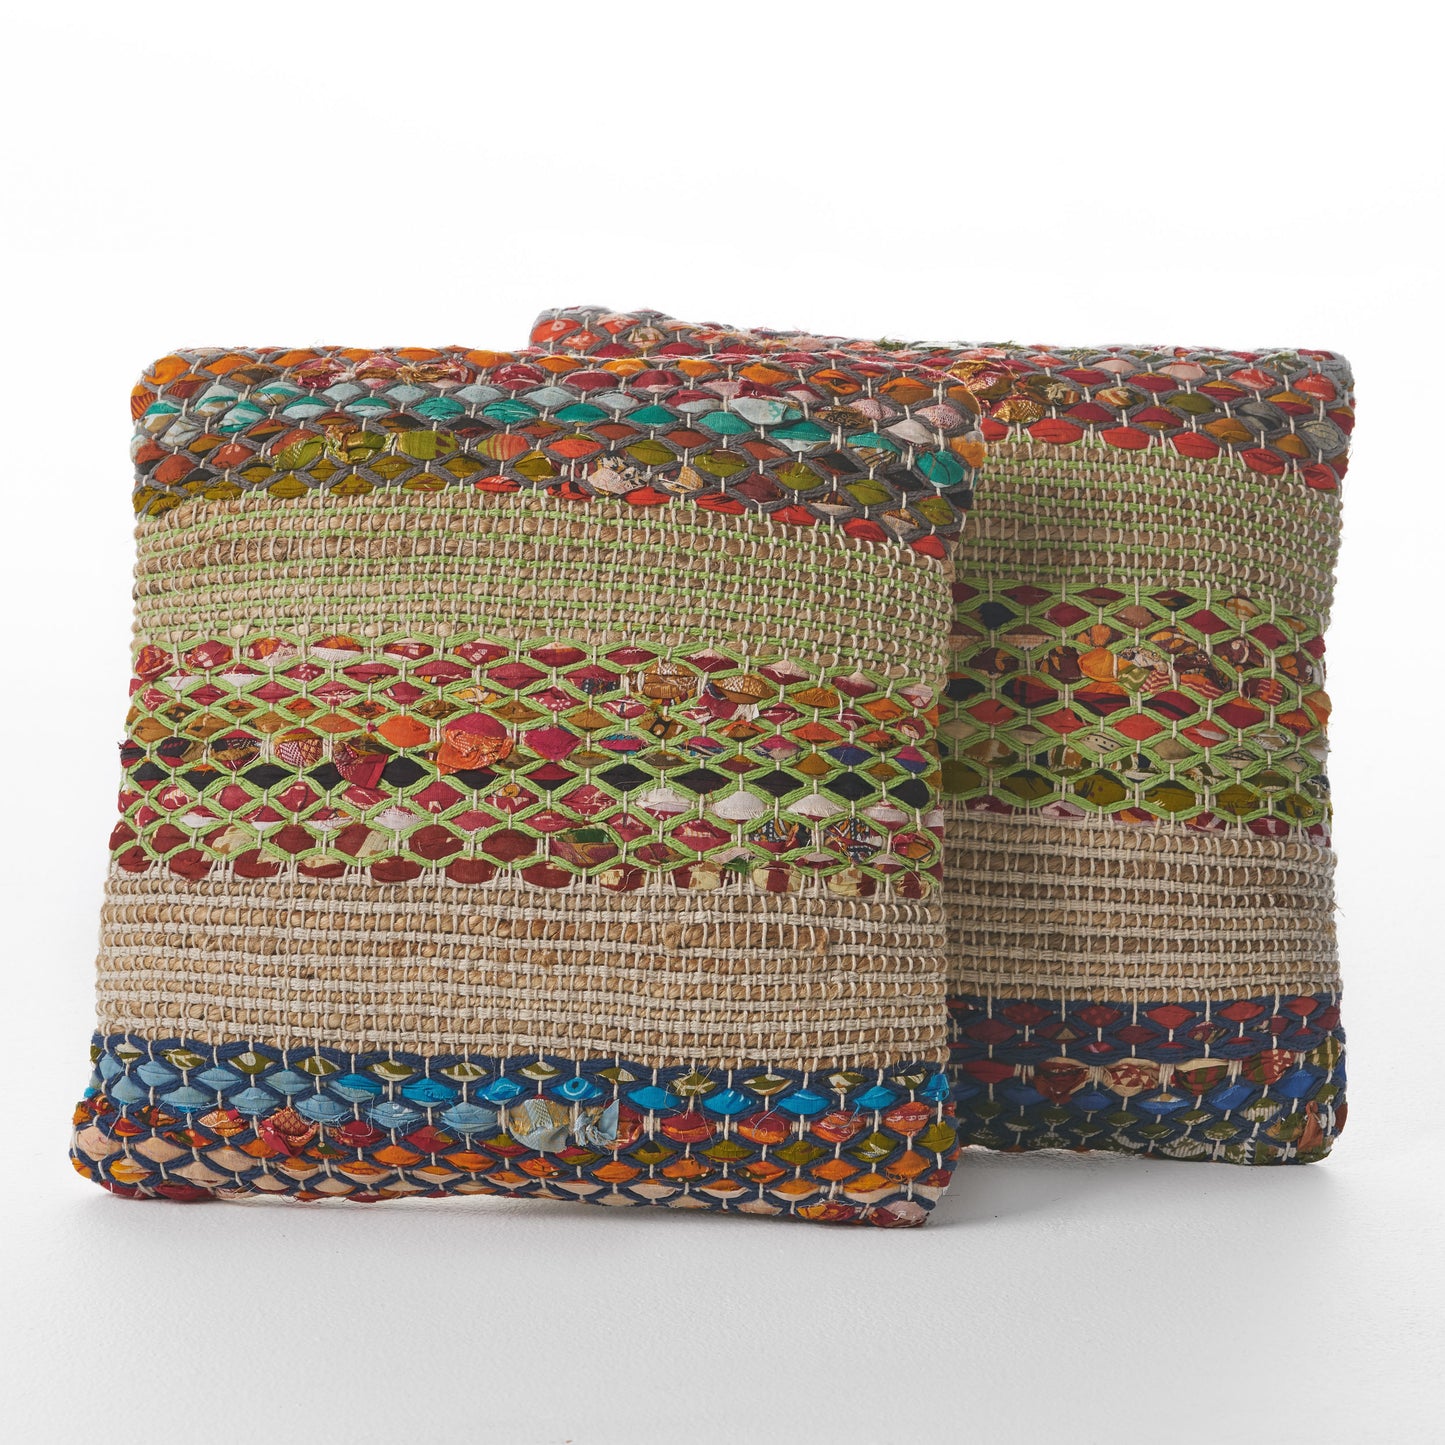 Layson Handcrafted Boho Fabric Pillow